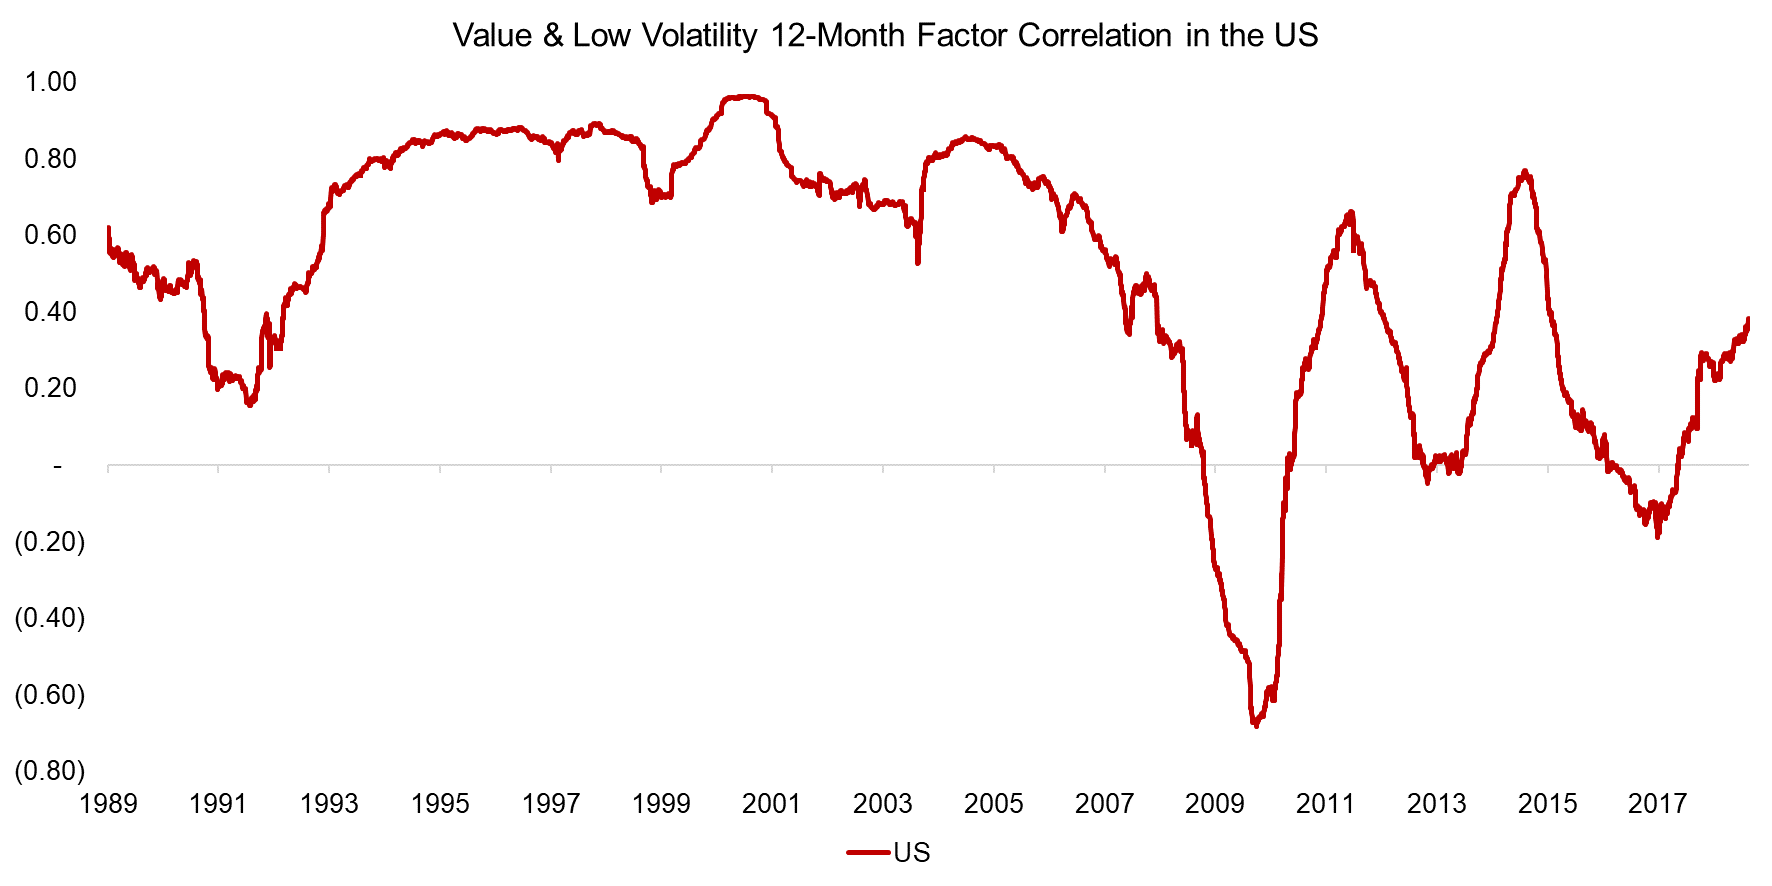 Value & Low Volatility 12-Month Factor Correlation in the US